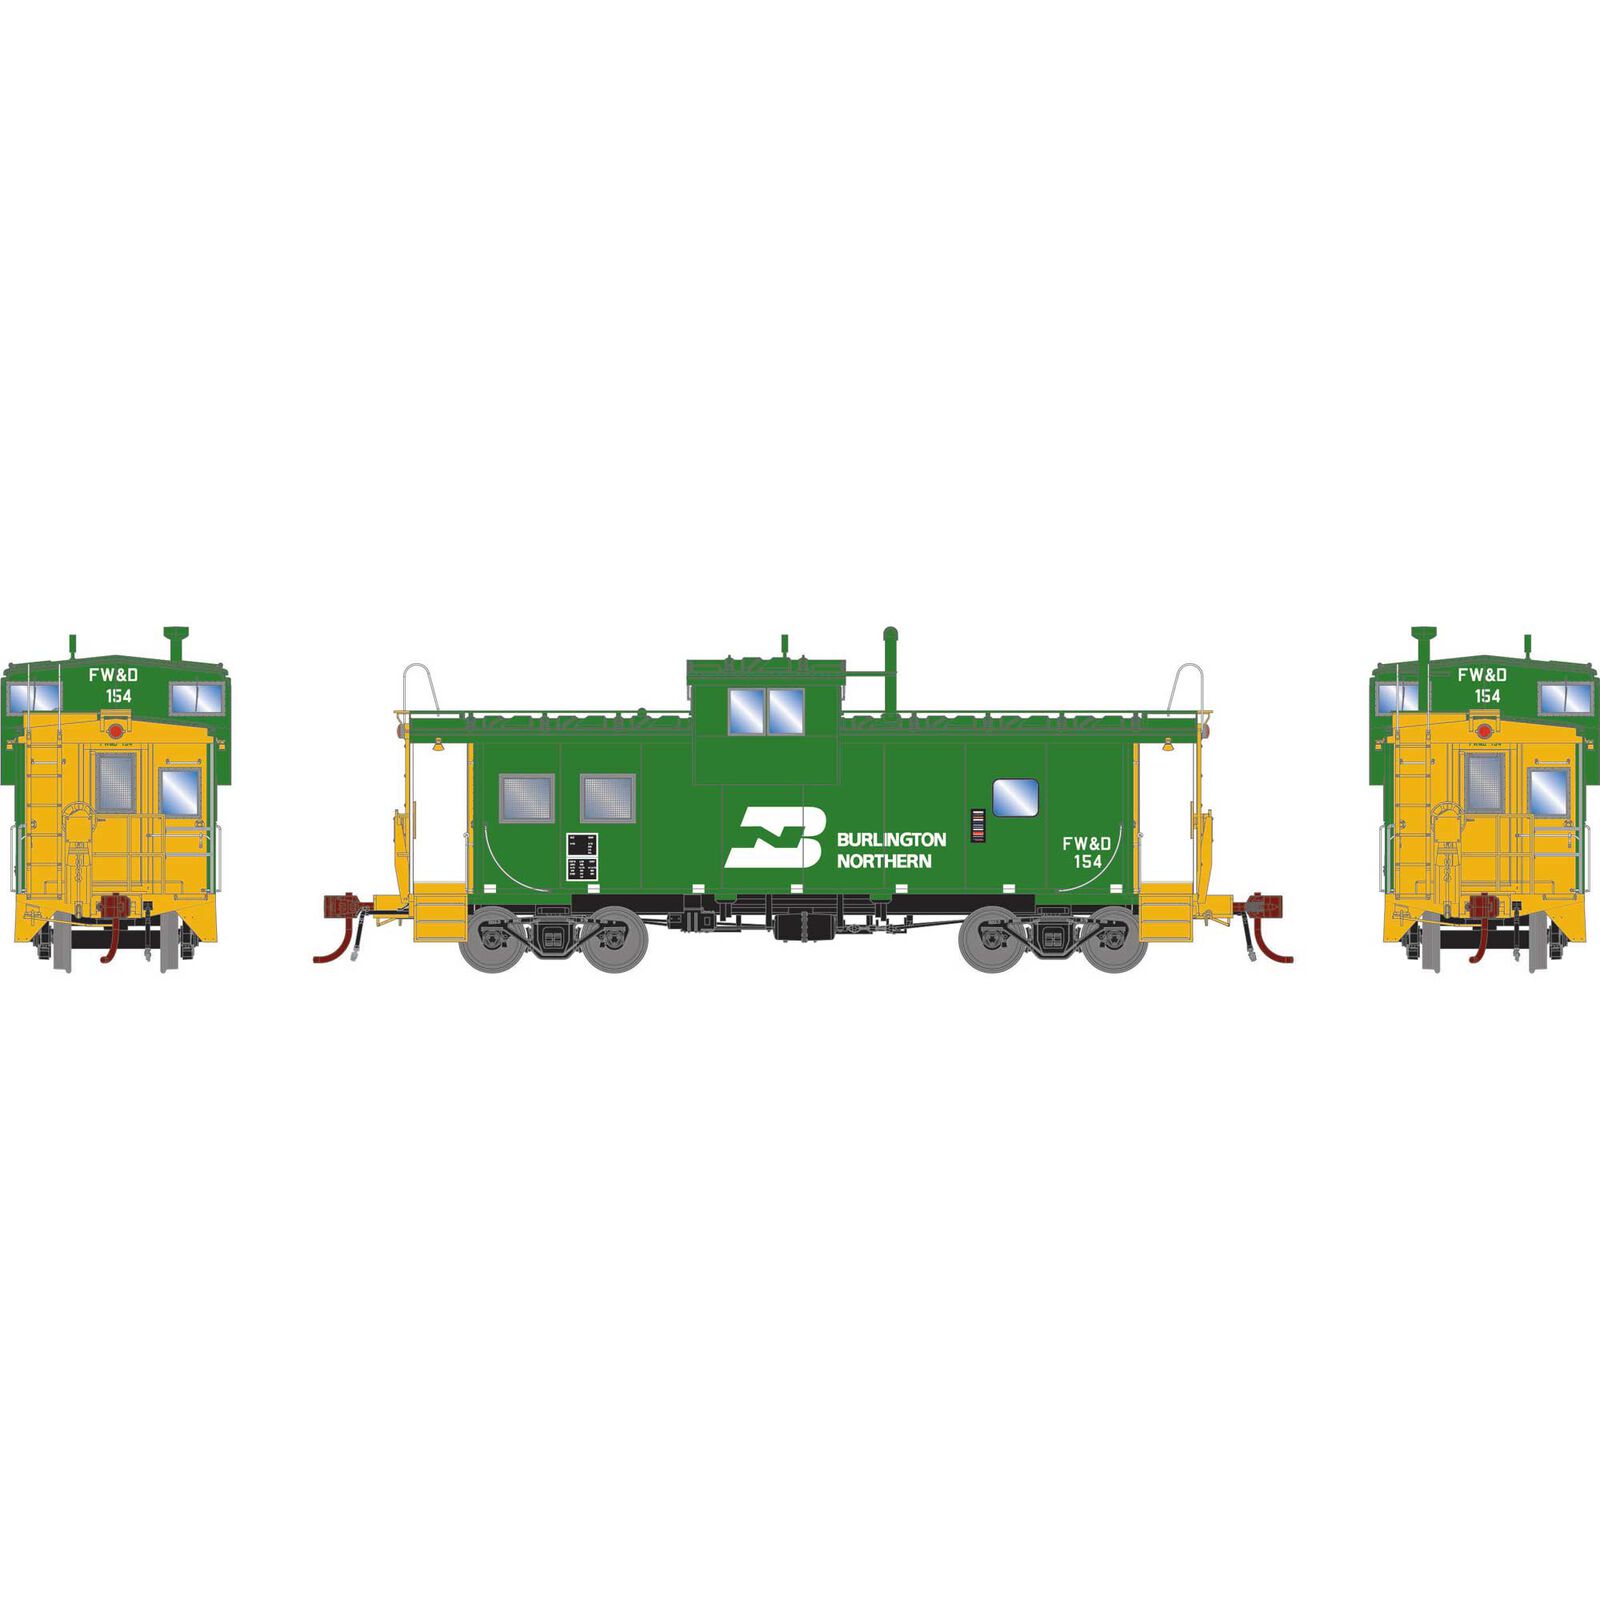 HO GEN ICC Caboose with Lights, FWD #154